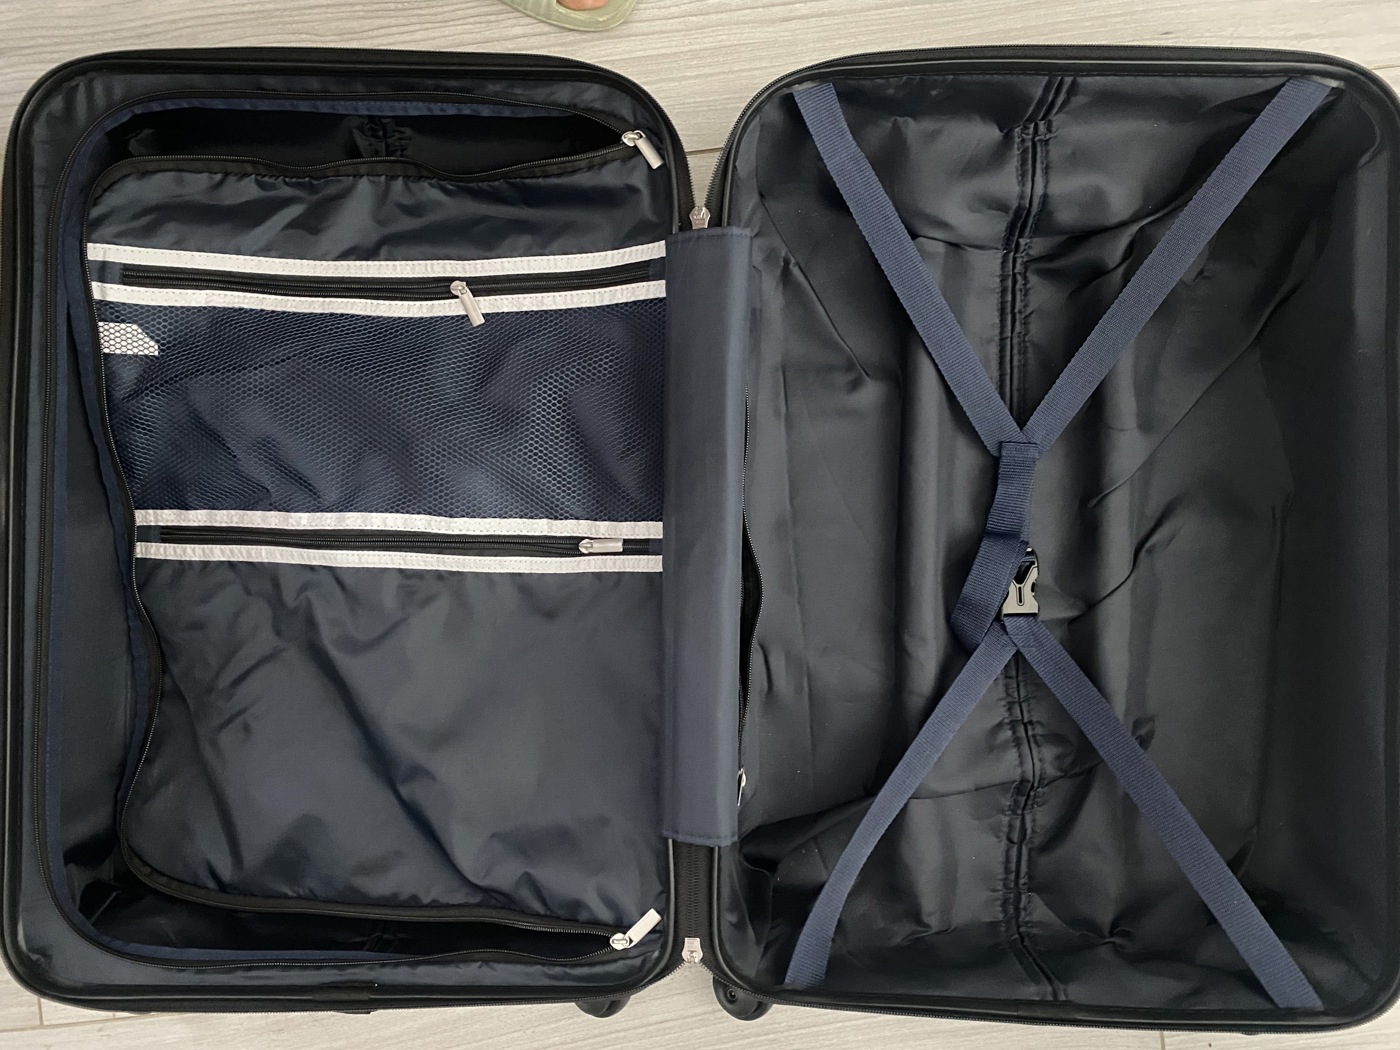 SUITCASE/LUGGAGE FOR SALE - ecay